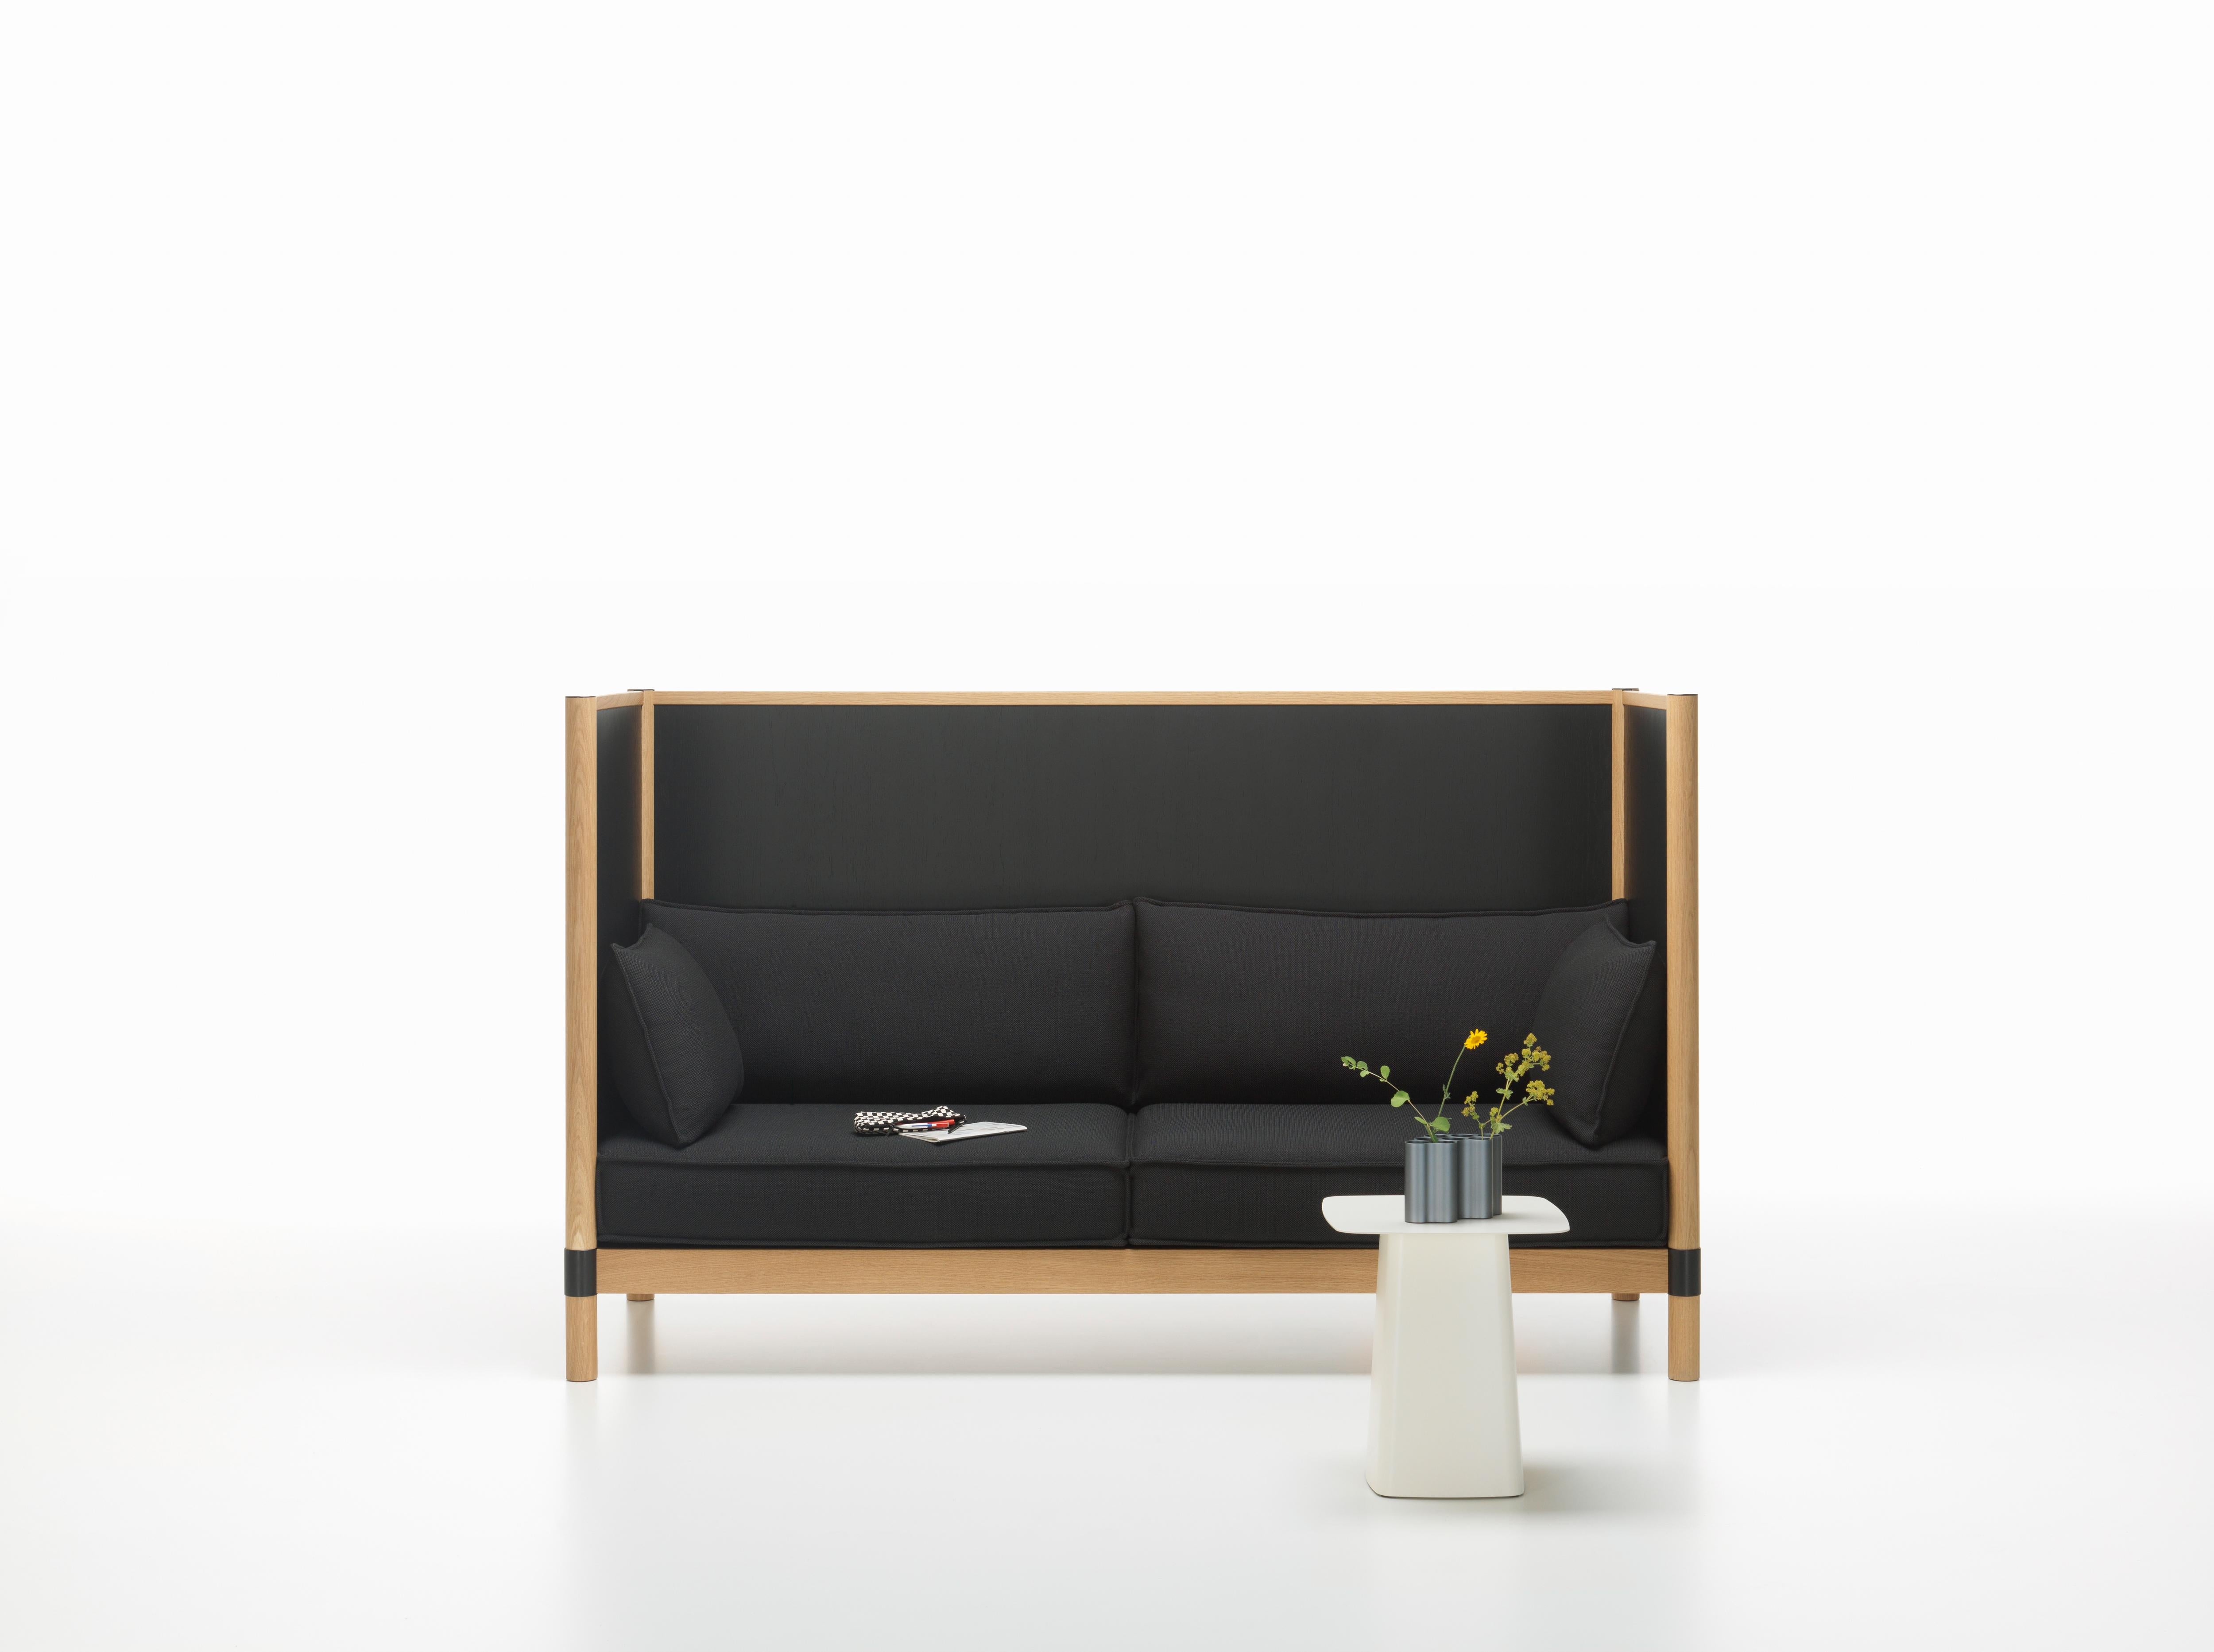 Vitra Cyl Highback Sofa in Dark Oak and Nero Plano by Ronan & Erwan Bouroullec In New Condition For Sale In New York, NY